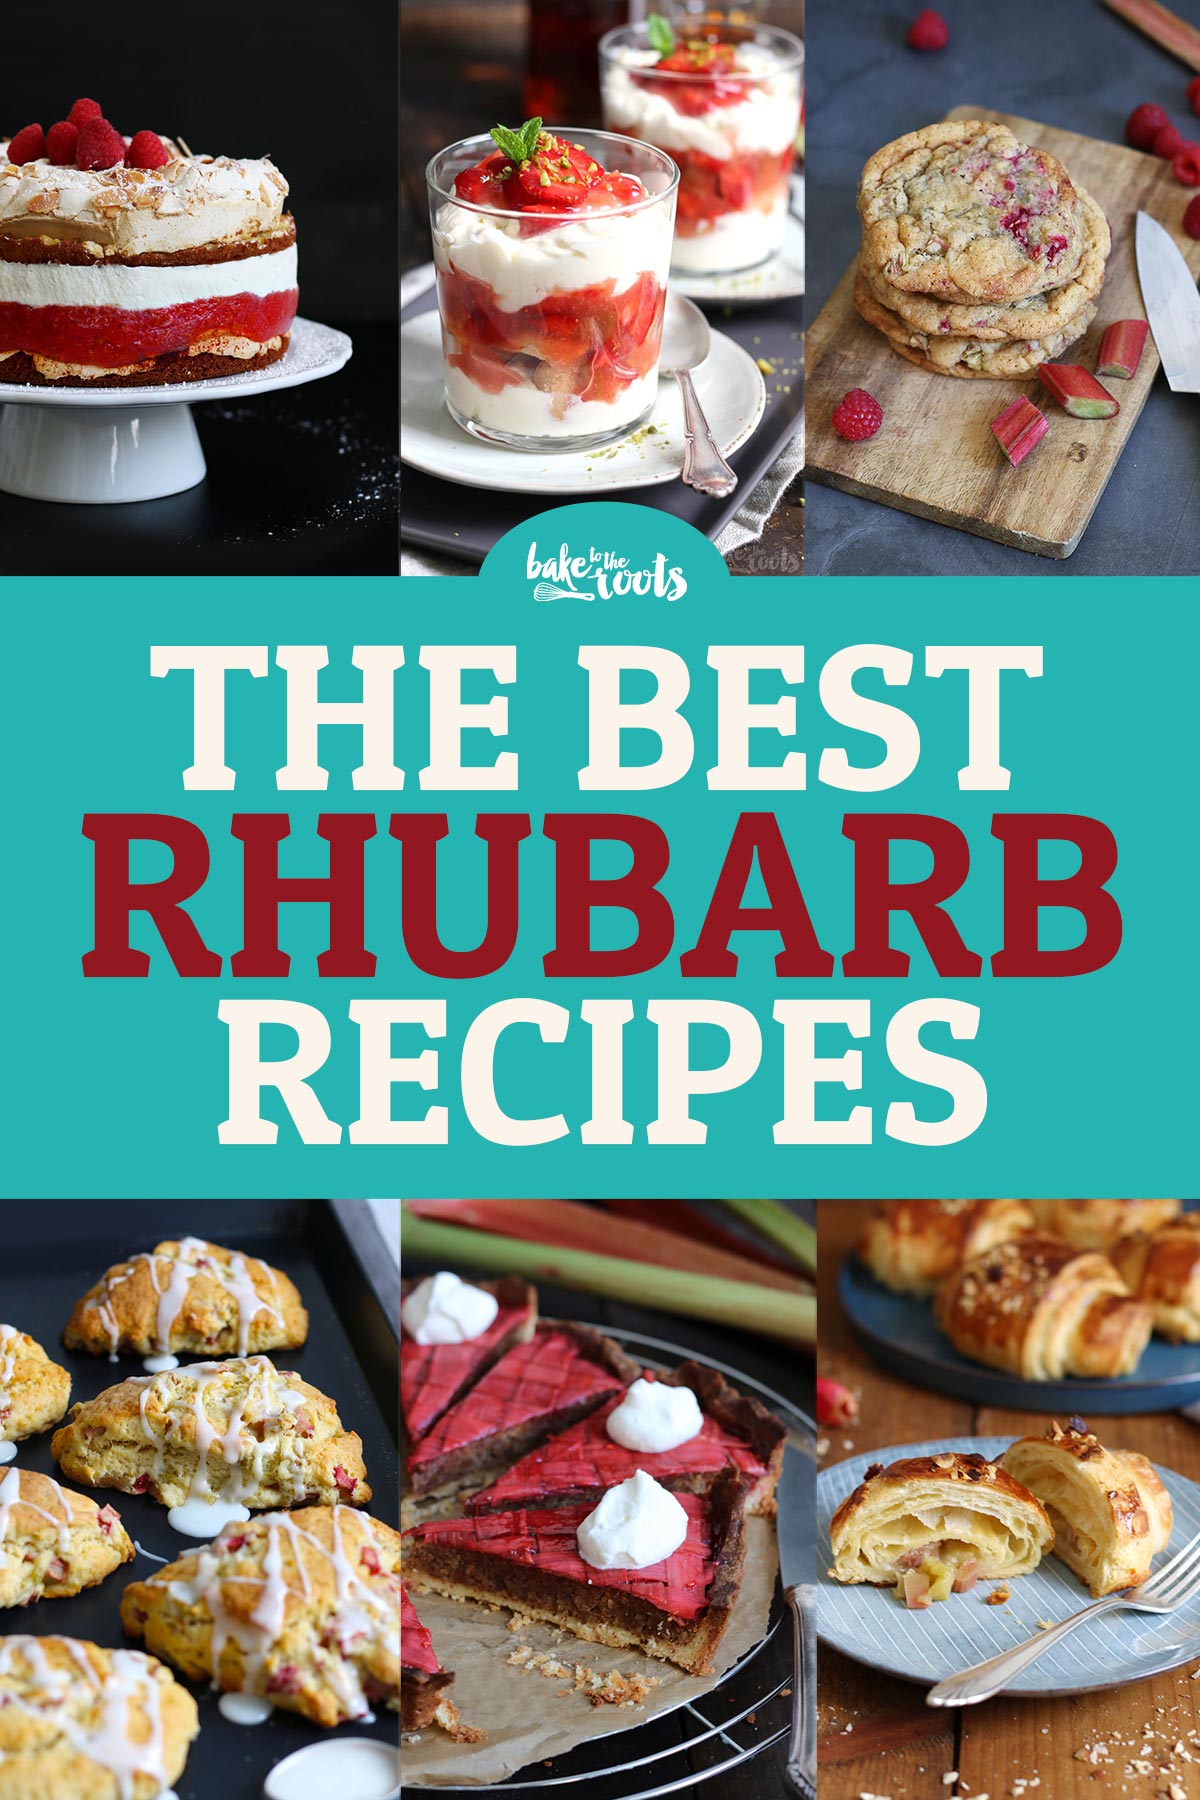 The Best Rhubarb Recipes | Bake to the roots